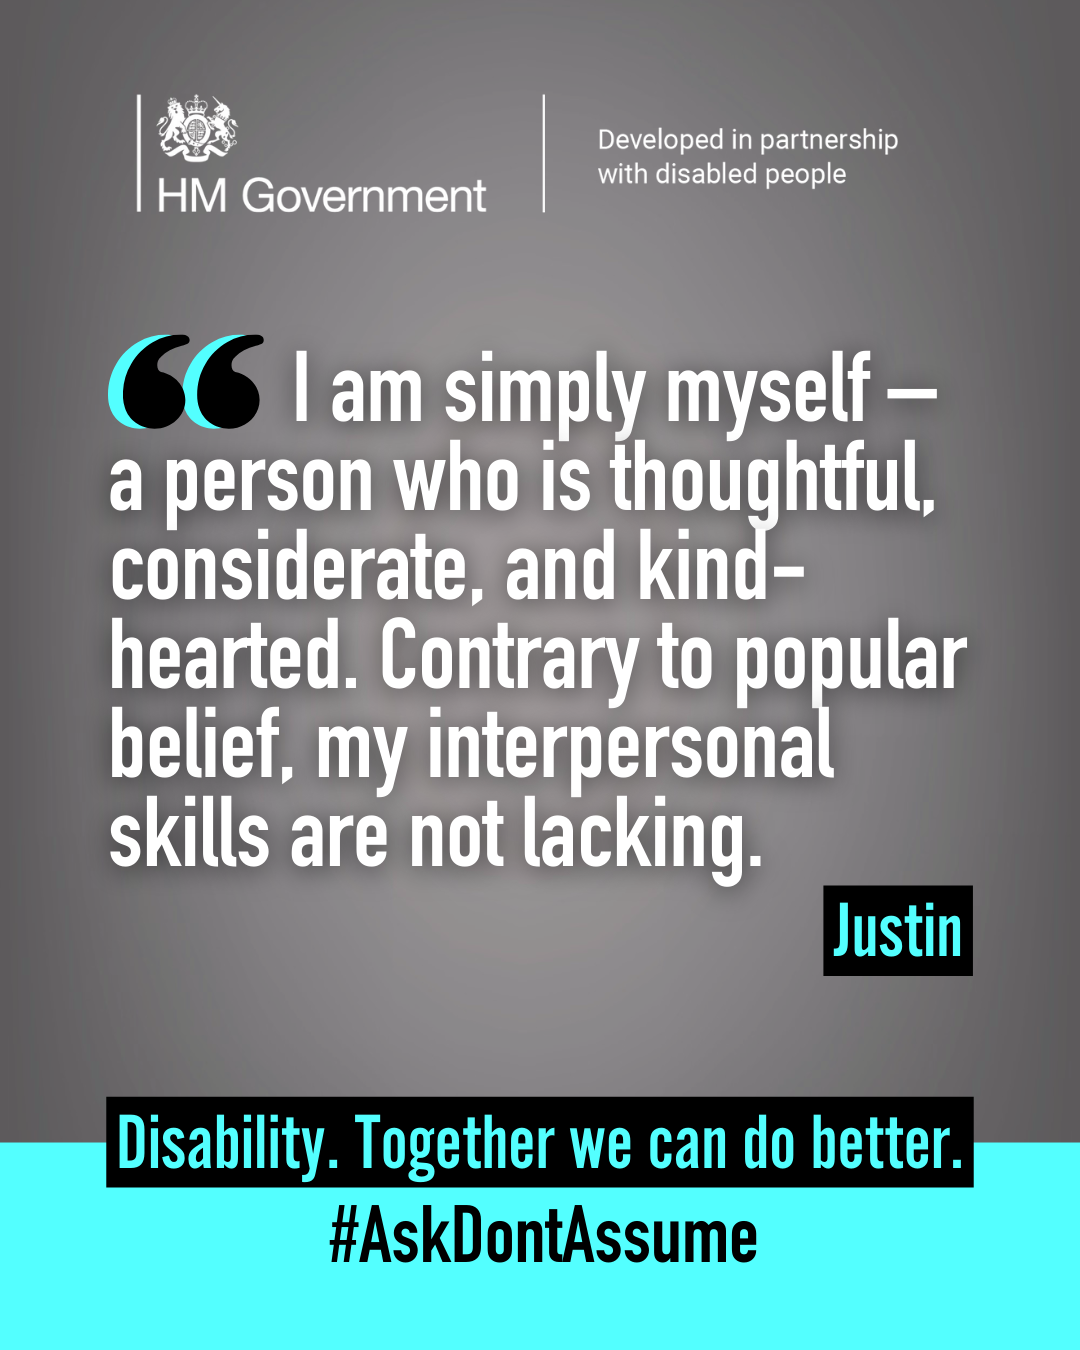 Dark grey portrait graphic with the HM Government logo and “Developed in partnership with disabled people” at the top. A quote from Justin reads: “I am simply myself - a person who is thoughtful, considerate, and kind-hearted. Contrary to popular belief, my interpersonal skills are not lacking”. At the bottom of the graphic it reads: “Disability. Together we can do better. #AskDontAssume”